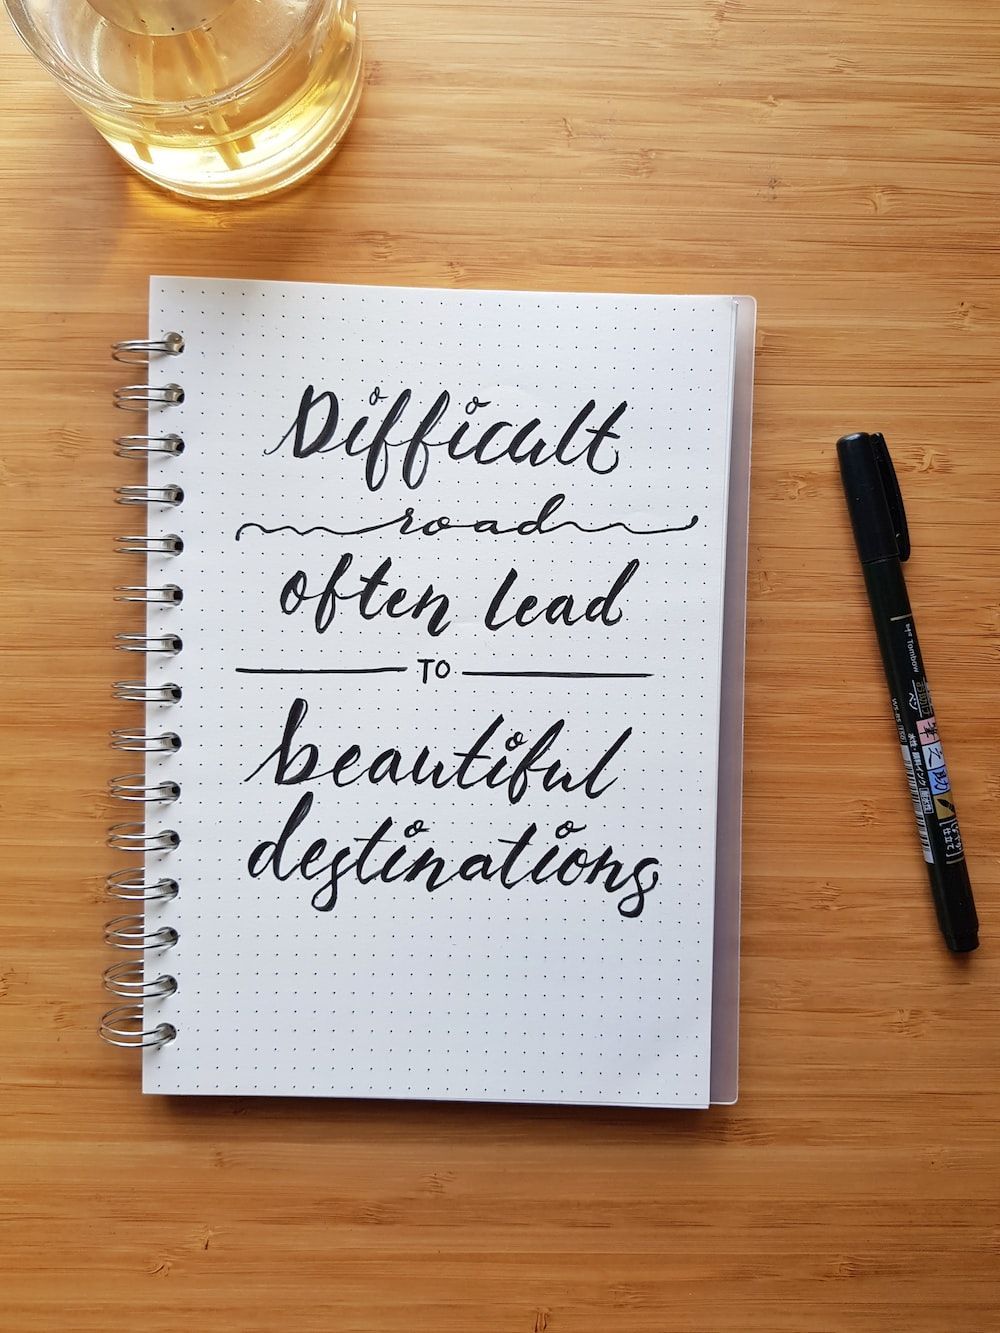 A notebook with the words different and often lead to beautiful destinations - Calligraphy